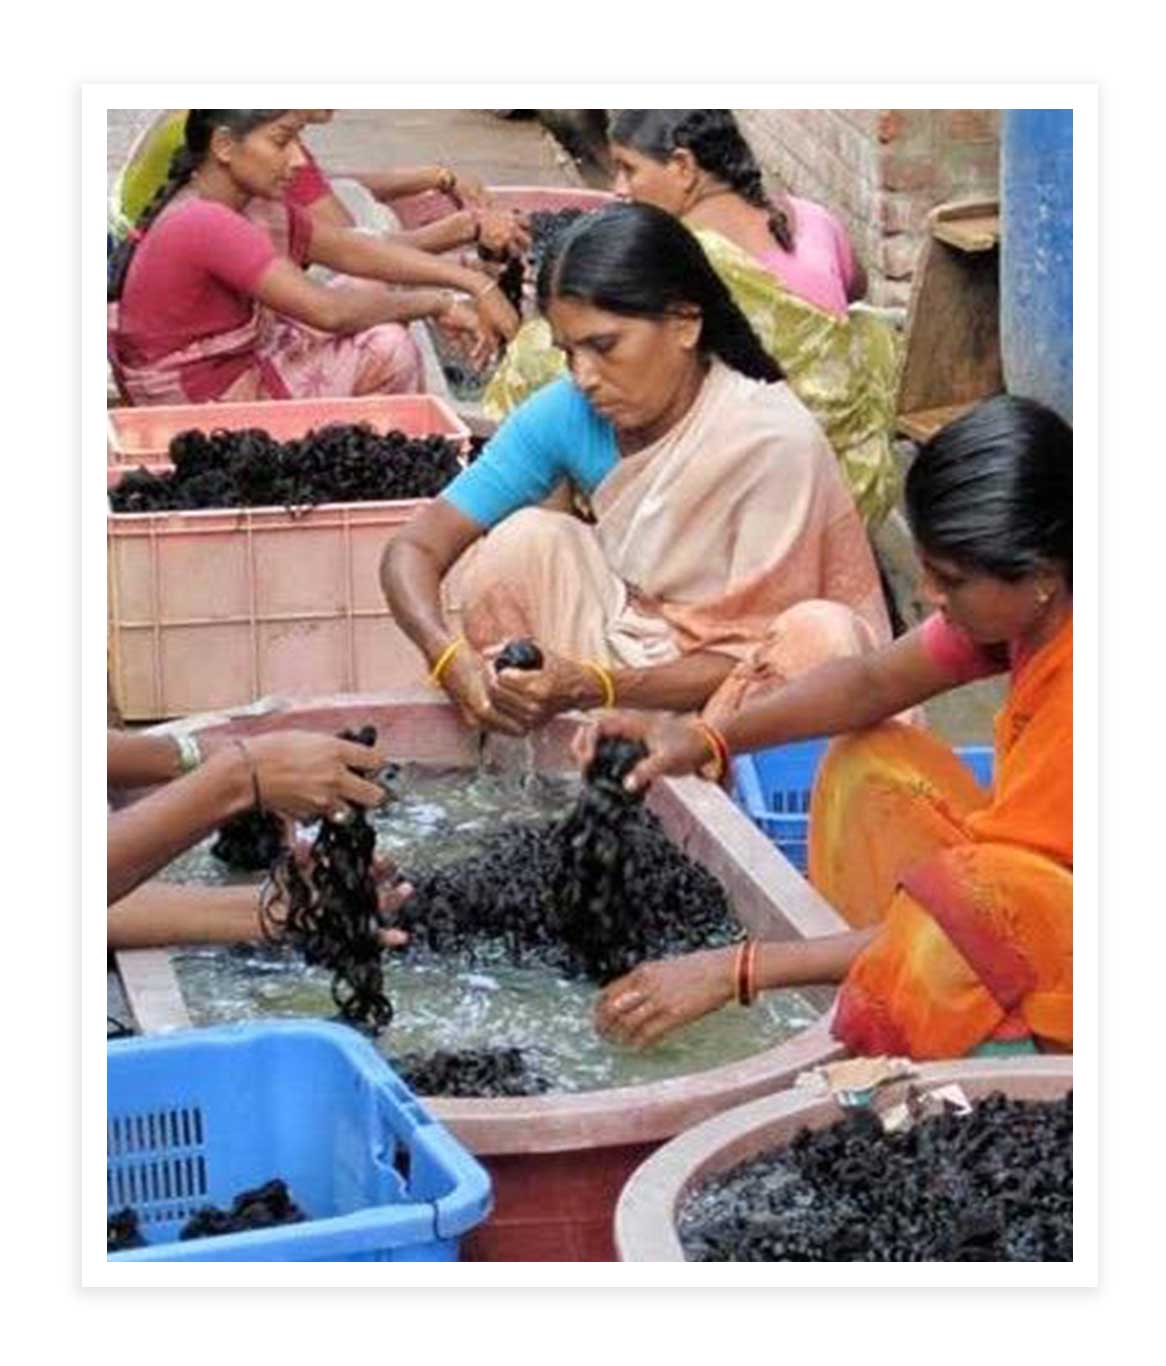 women washing hair extensions in india